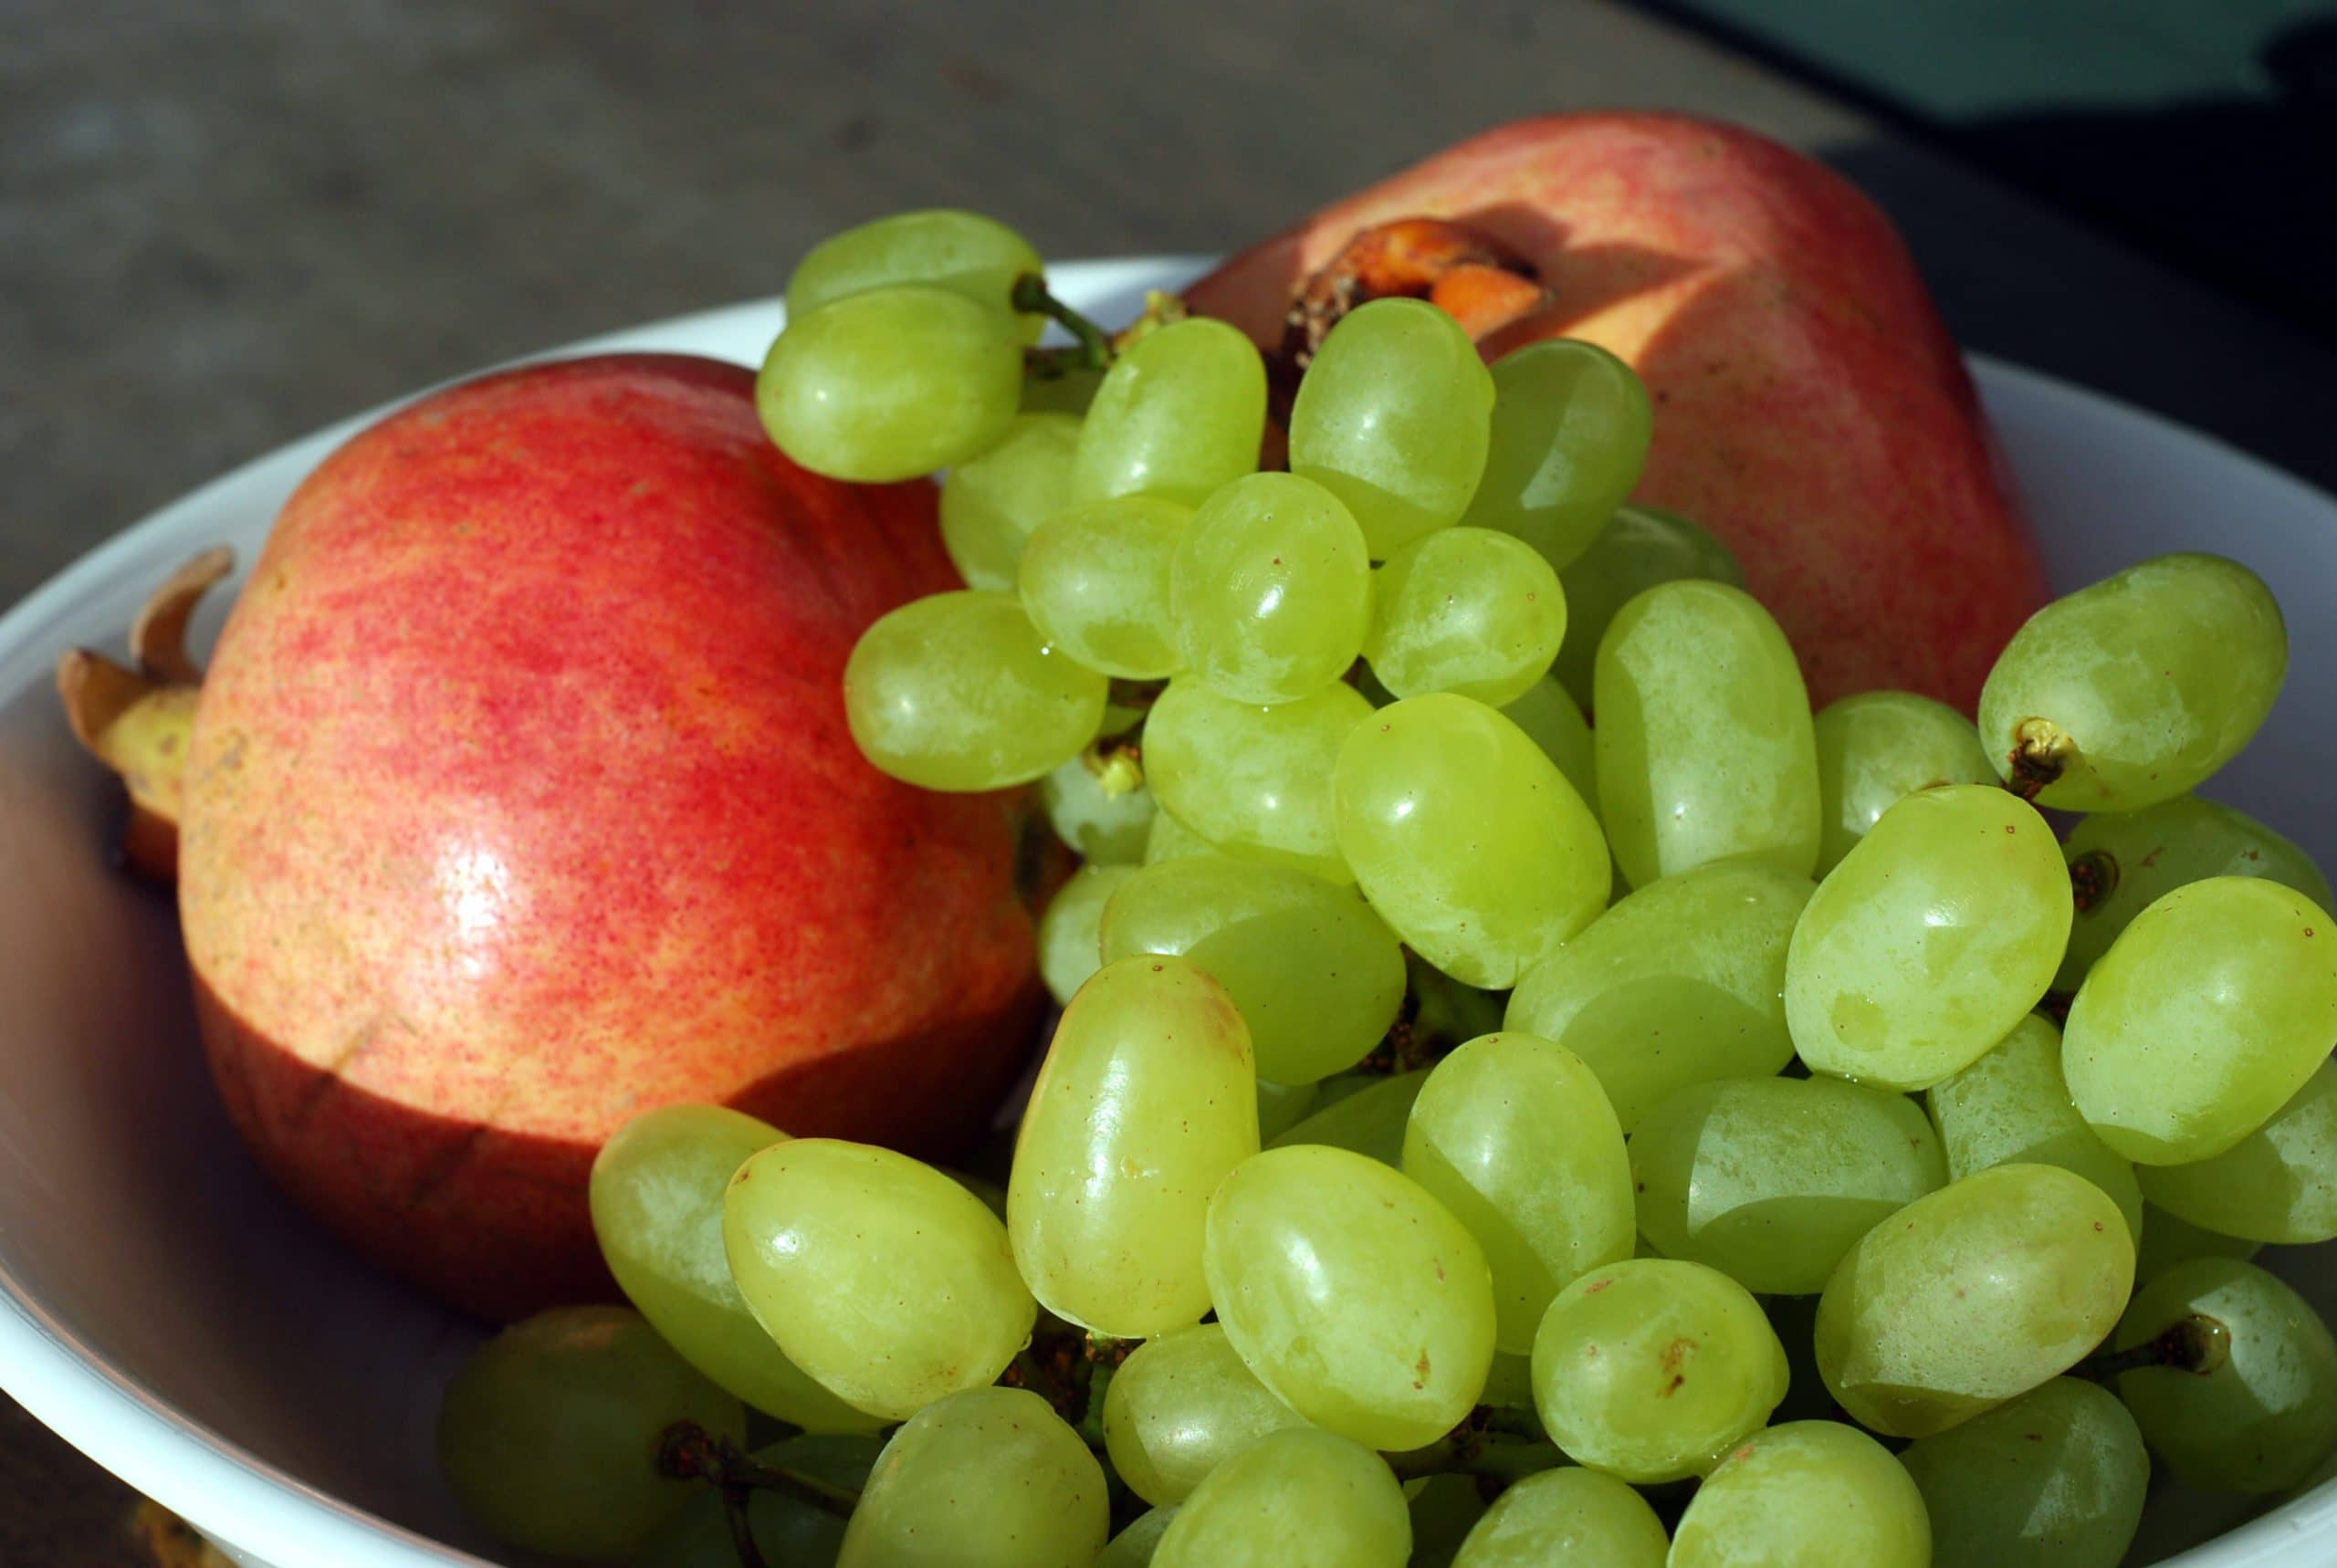 How Long Do Grapes Last In The Fridge? - Beezzly